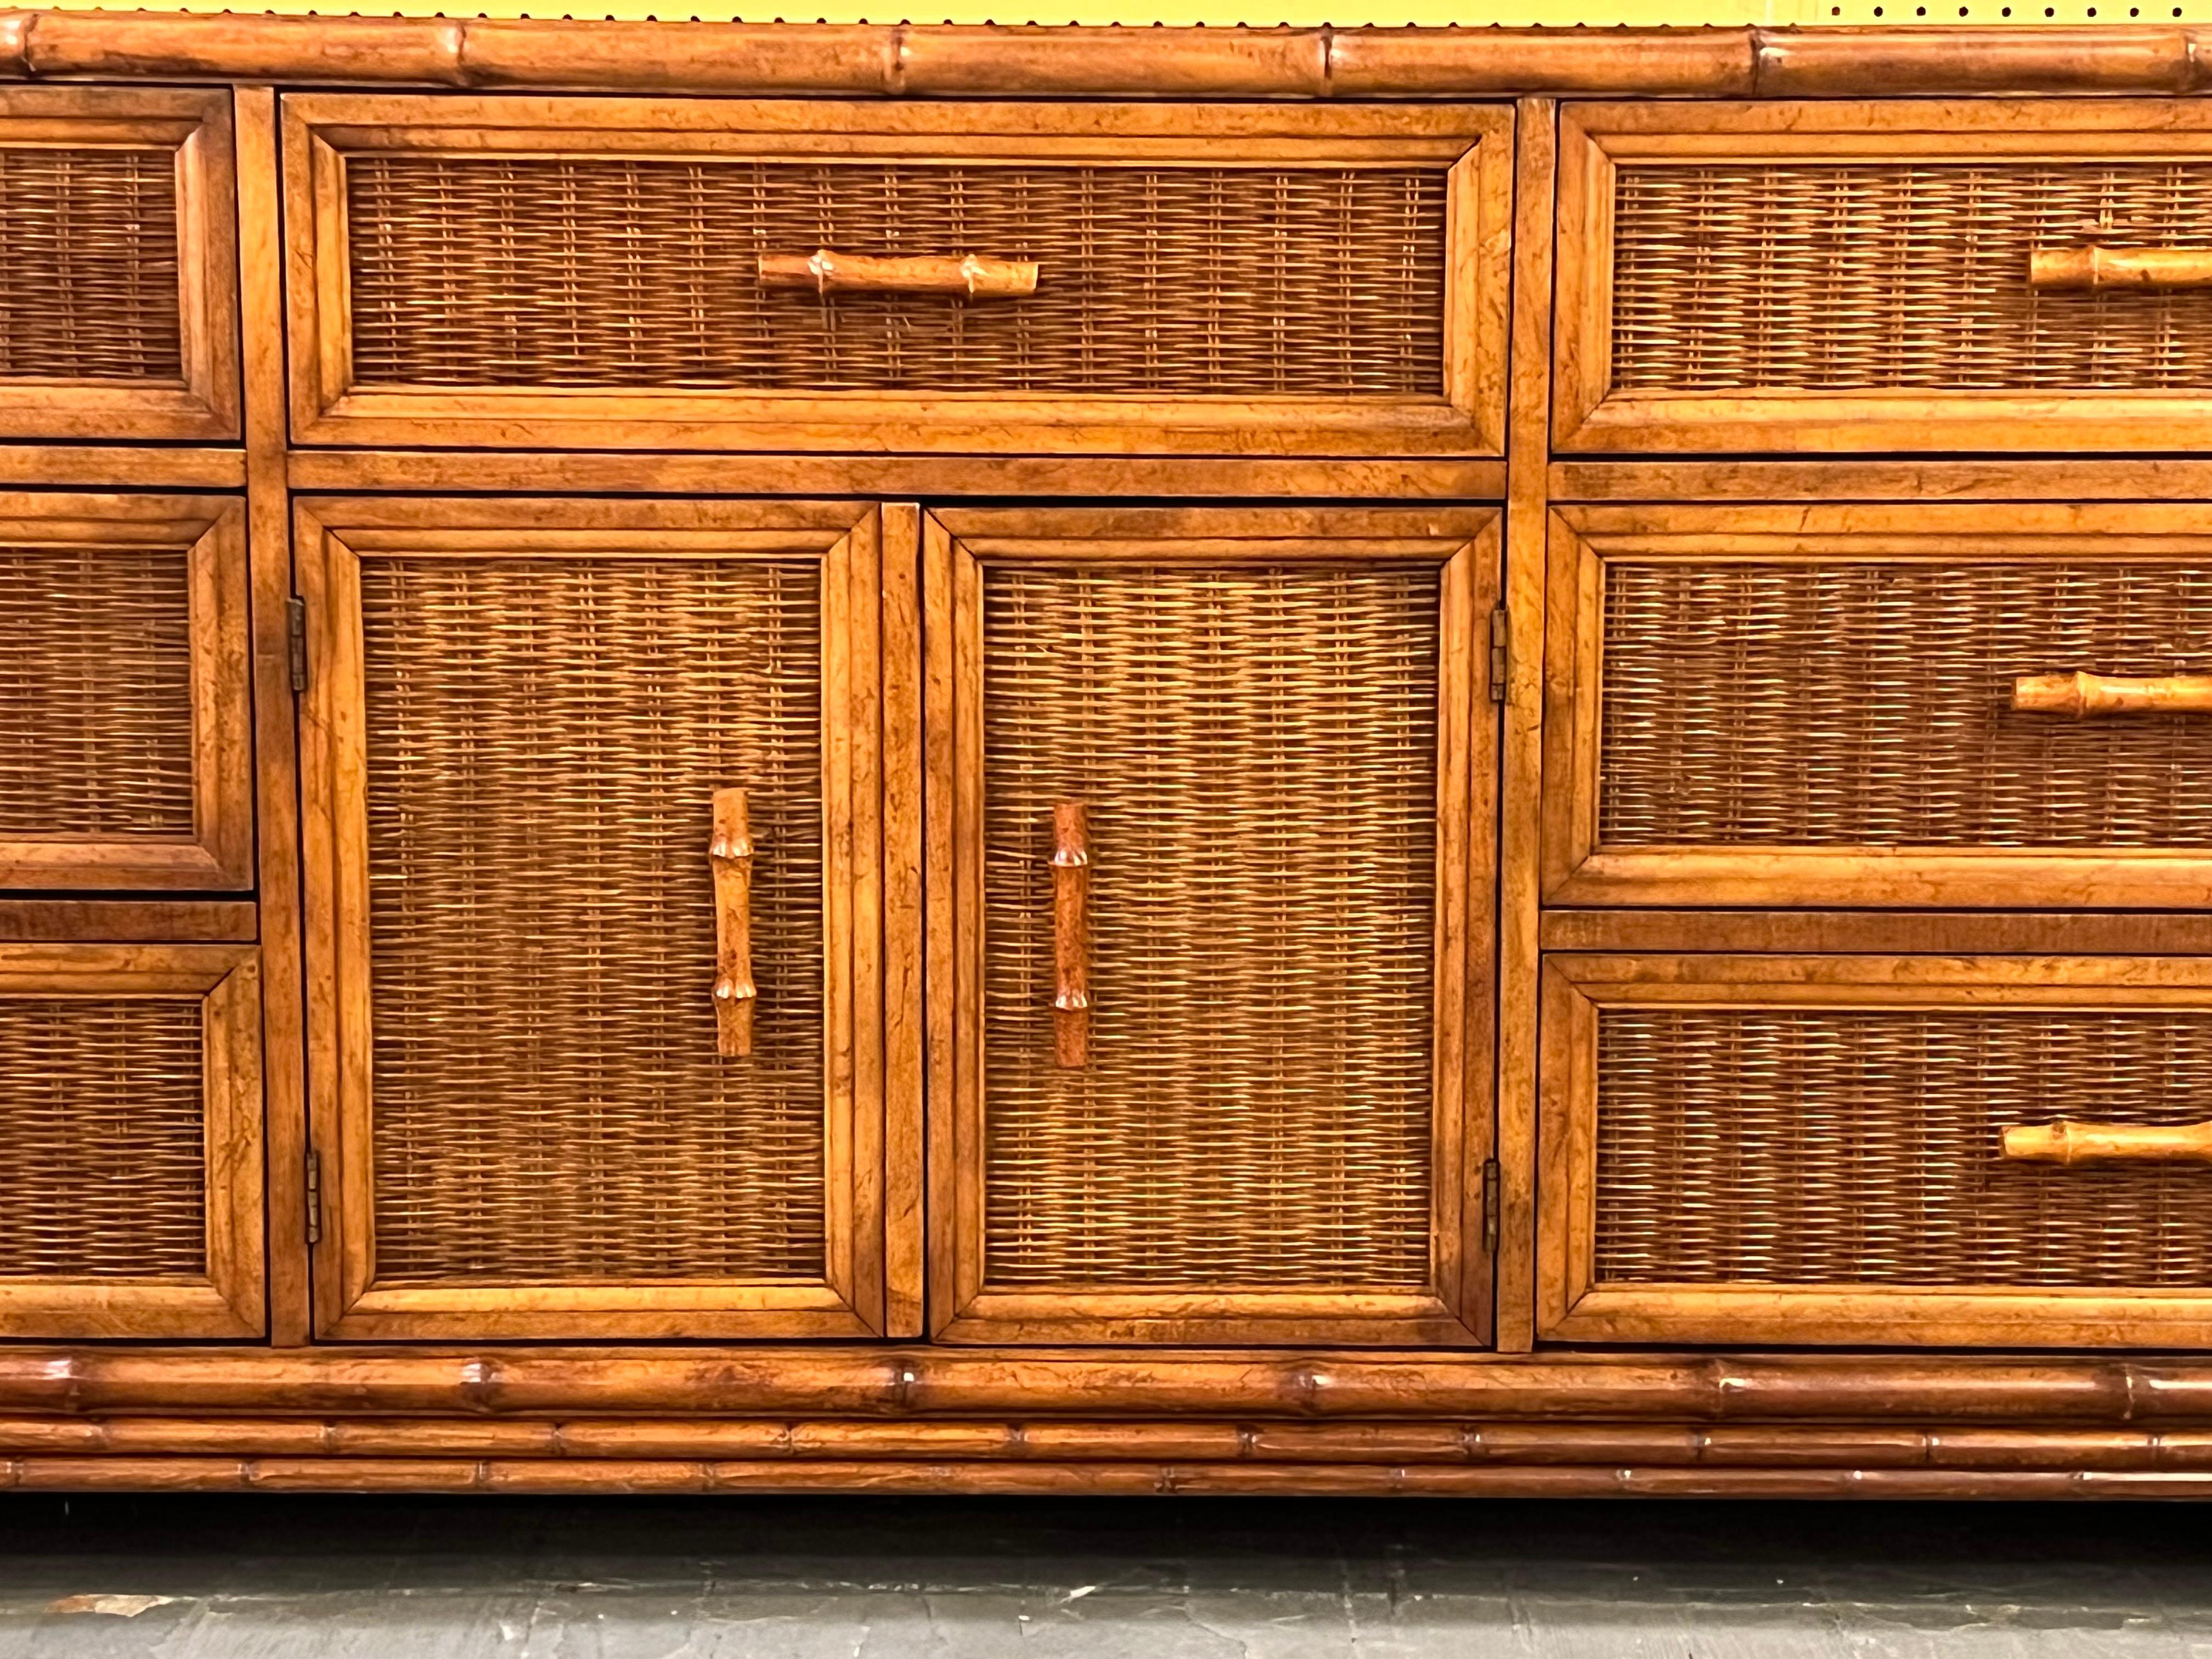 Dresser made of walnut carved to look like bamboo and cane rattan on the drawers and sides.
This dresser features 3 drawers on each side, 1 on the middle top. The 2 doors in the middle open on 2 drawers.
A matching tallboy is available.

Utilizing